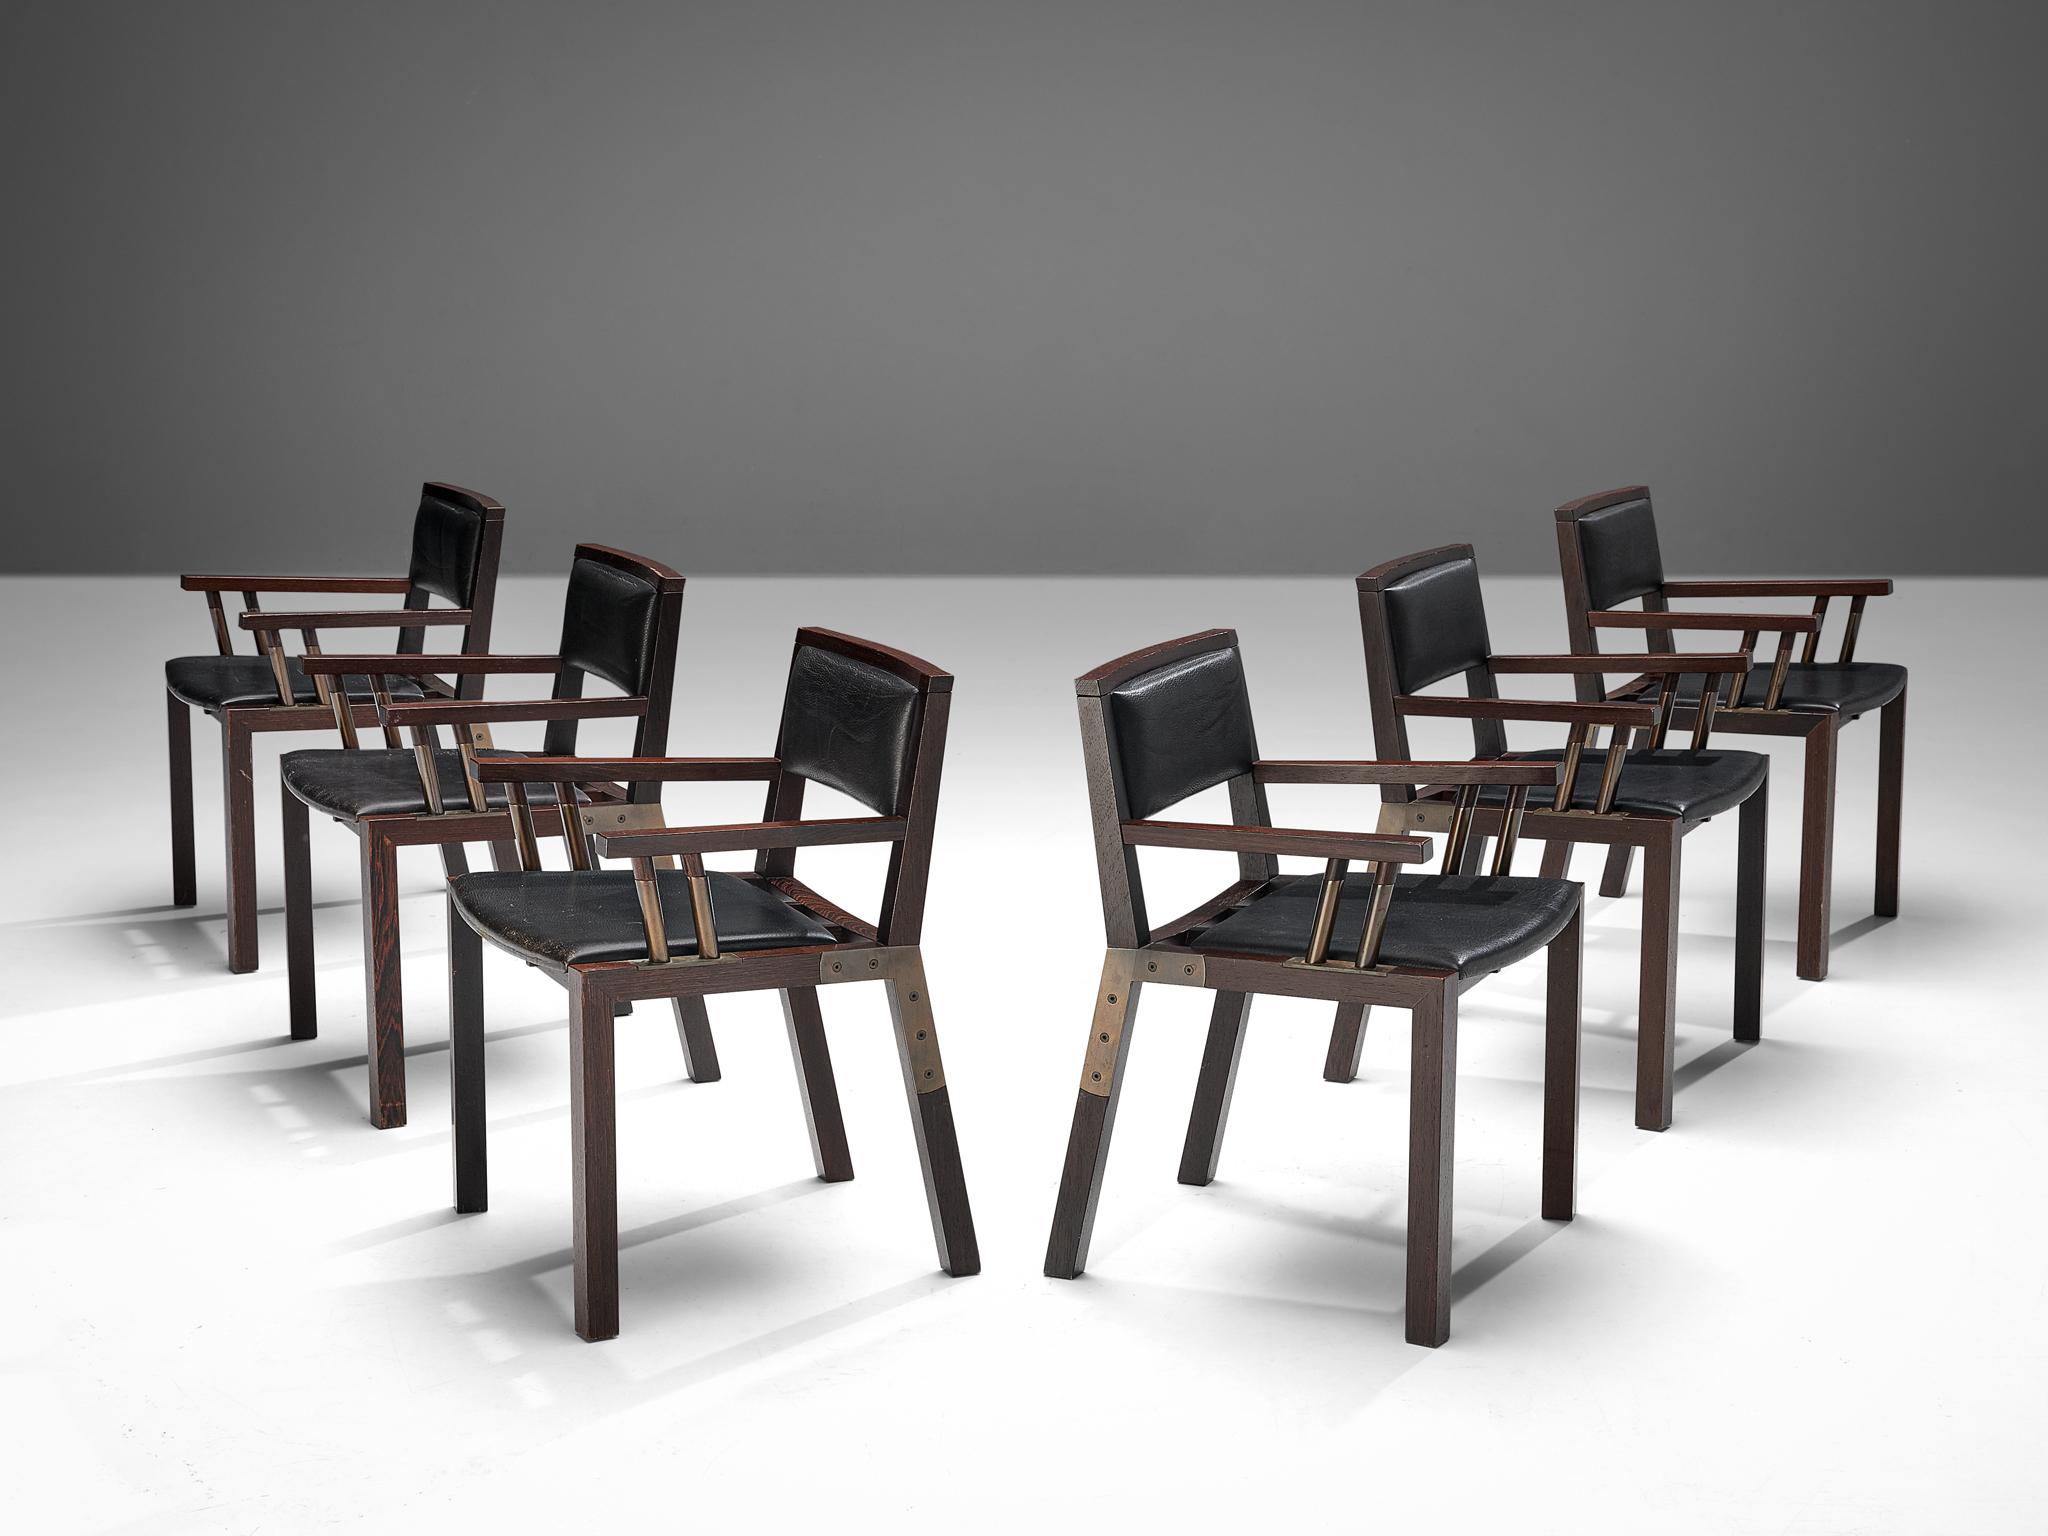 Jean-Michel Wilmotte for Tecno, set of six dining chairs model ‘Grand Louvre’, wenge, leather, Italy, circa 1989 

These extremely rare dining chairs are designed by the renowned French architect Jean-Michel Wilmotte and commissioned by the Parisian